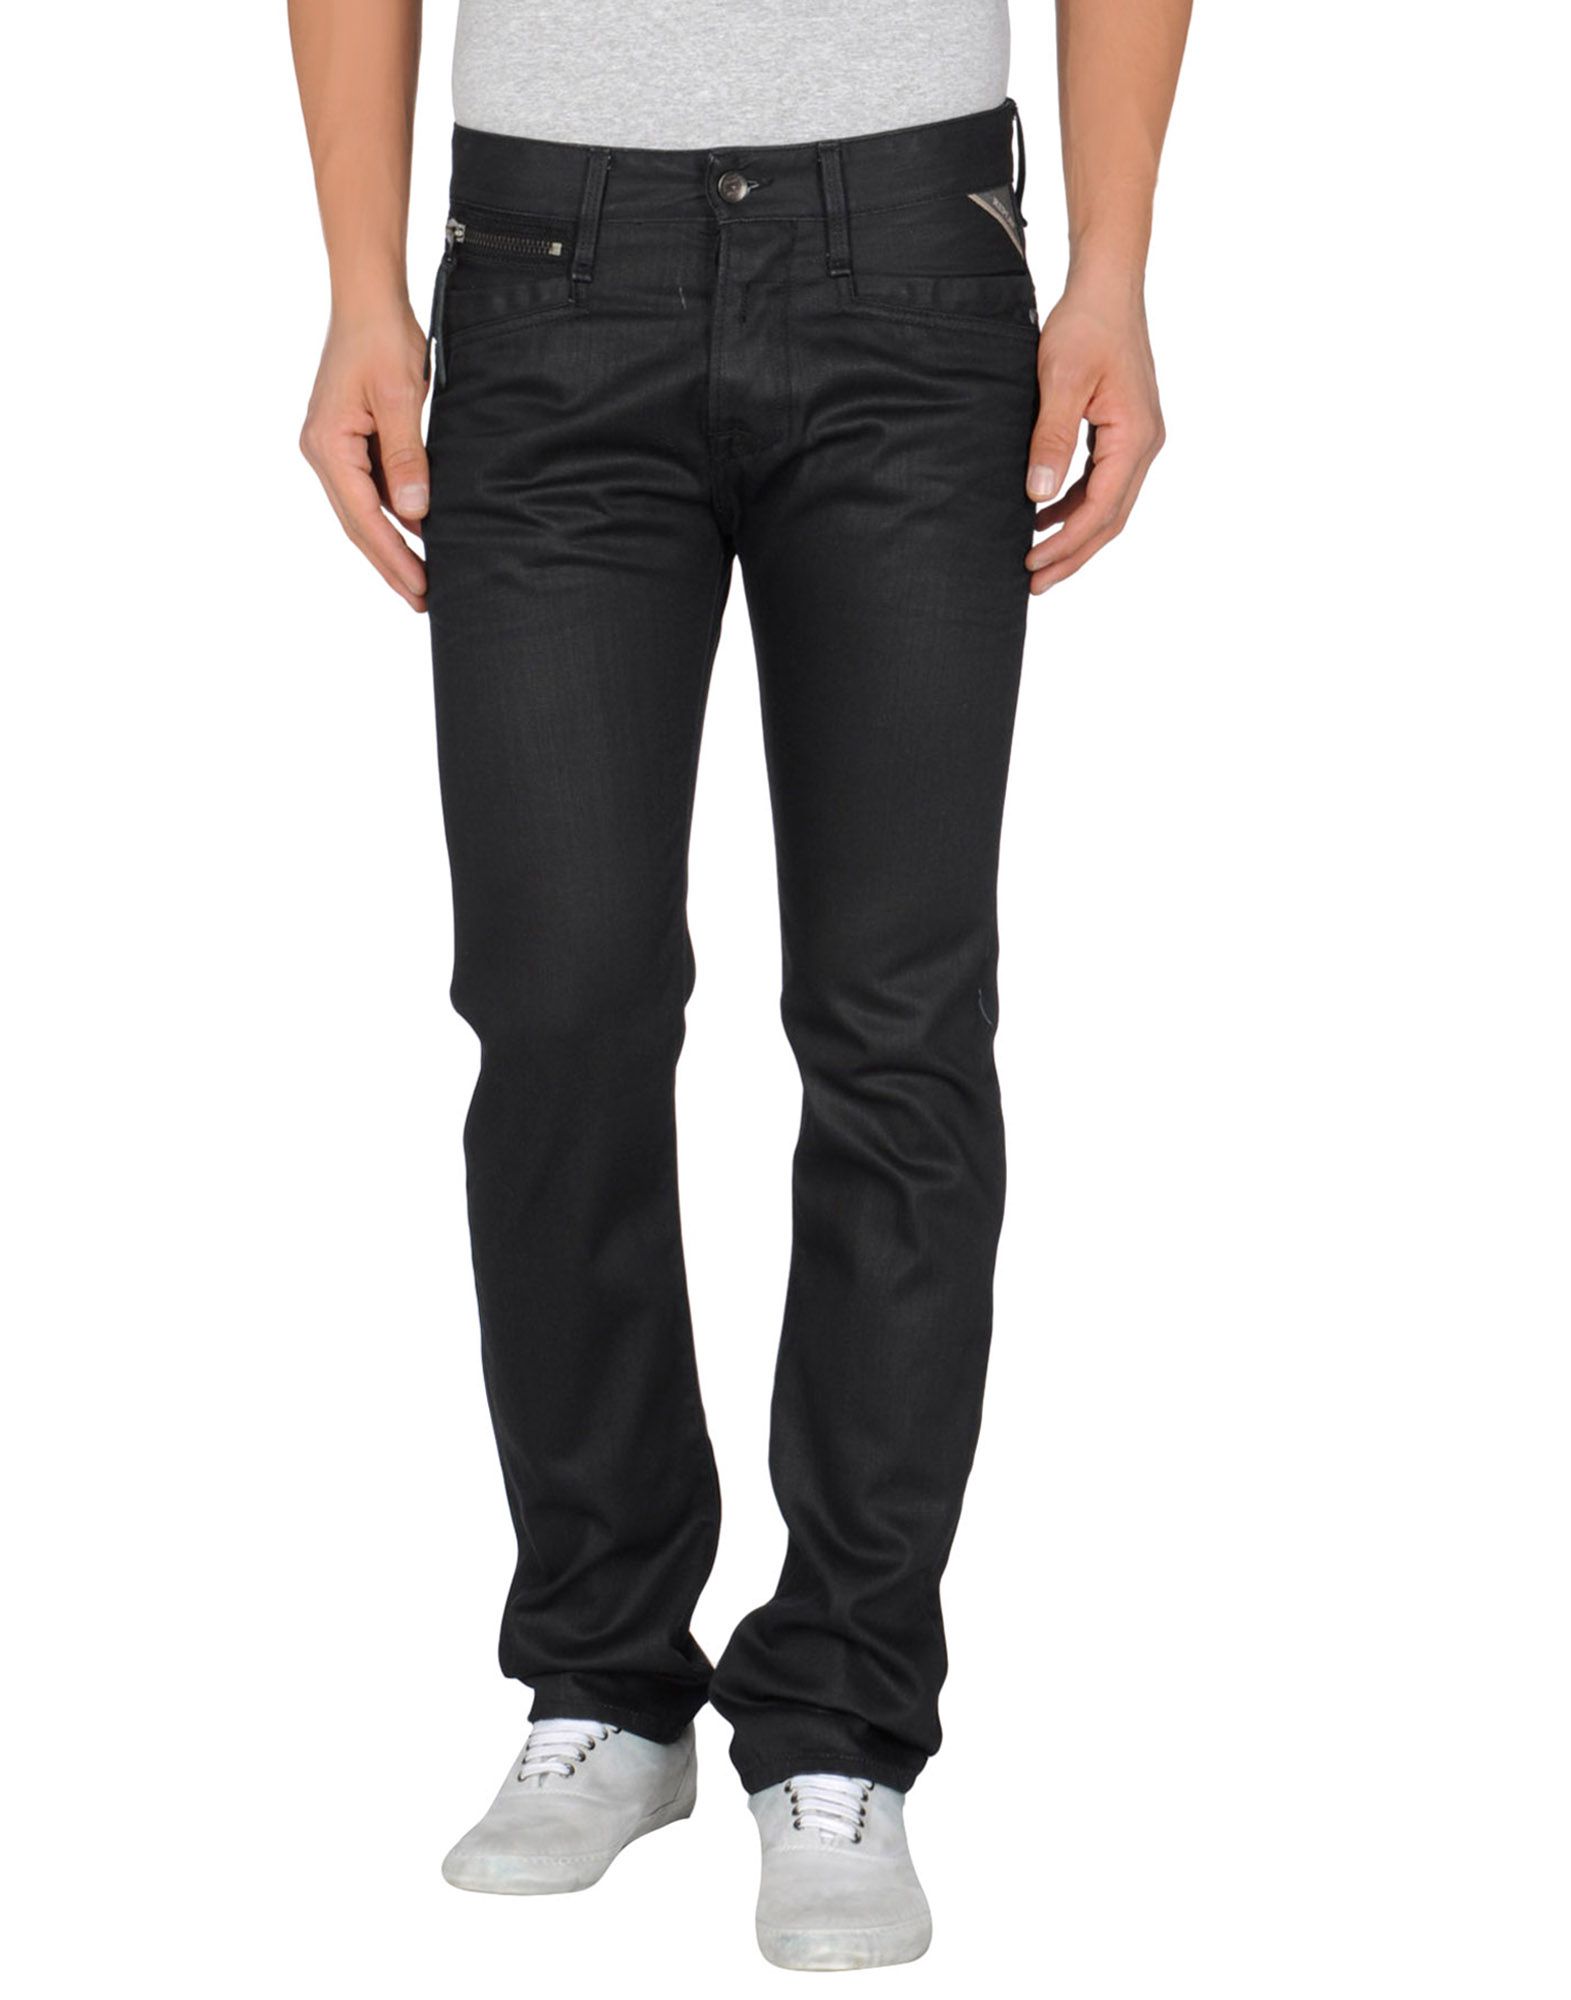 Replay Denim Numasig Tapered Fit Jeans in Black for Men - Lyst